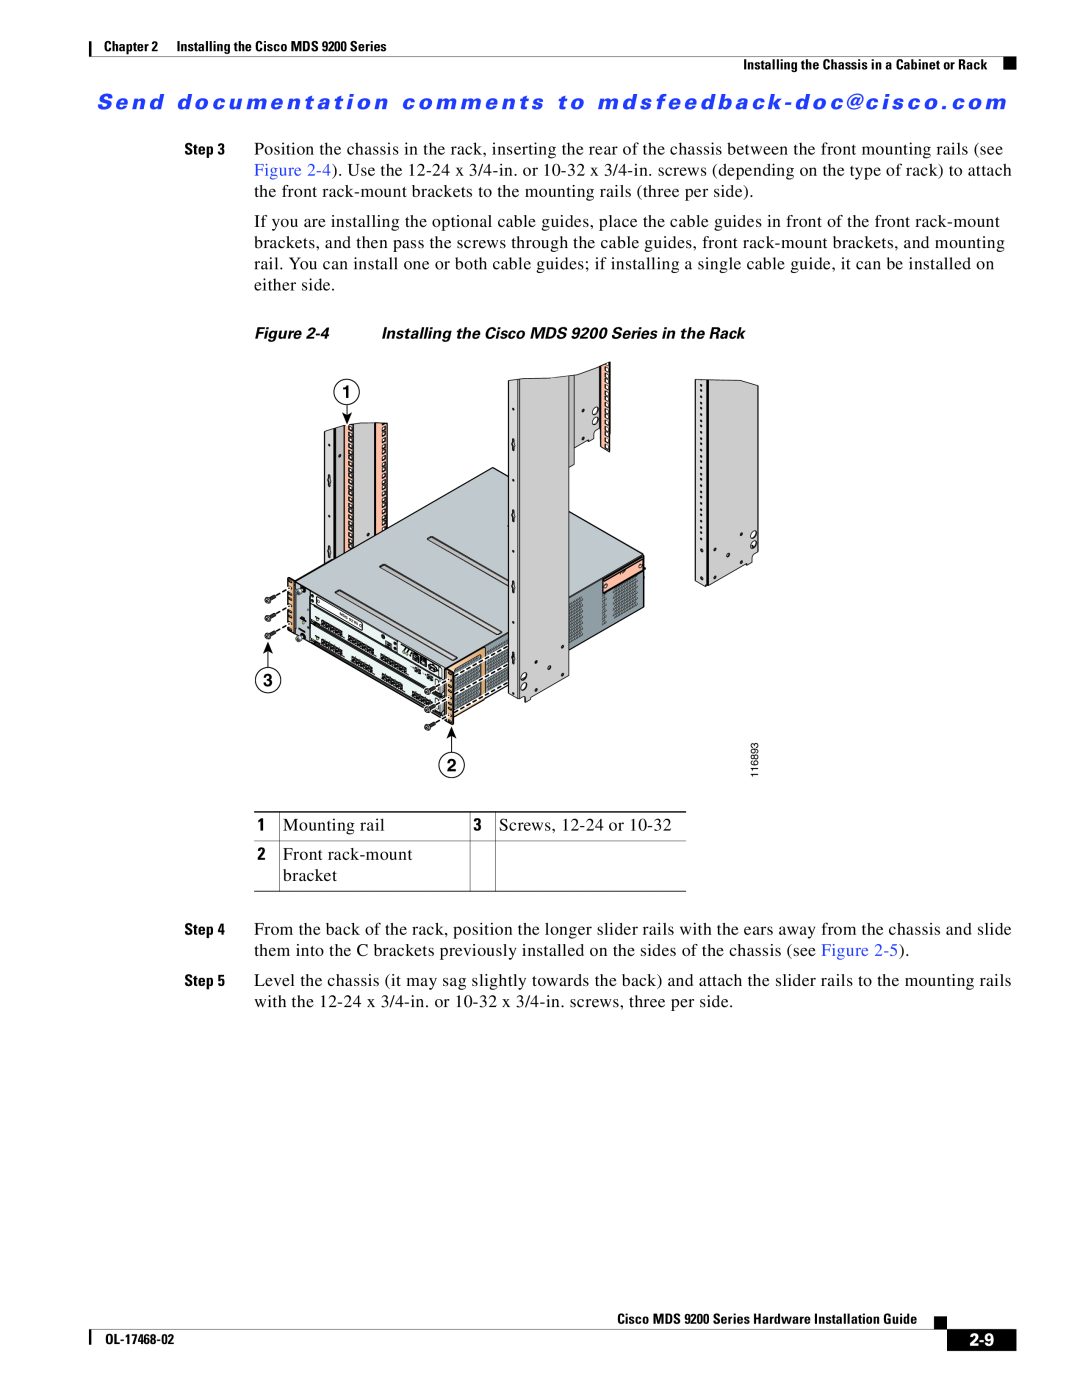 Cisco Systems manual 4 Installing the Cisco MDS 9200 Series in the Rack 